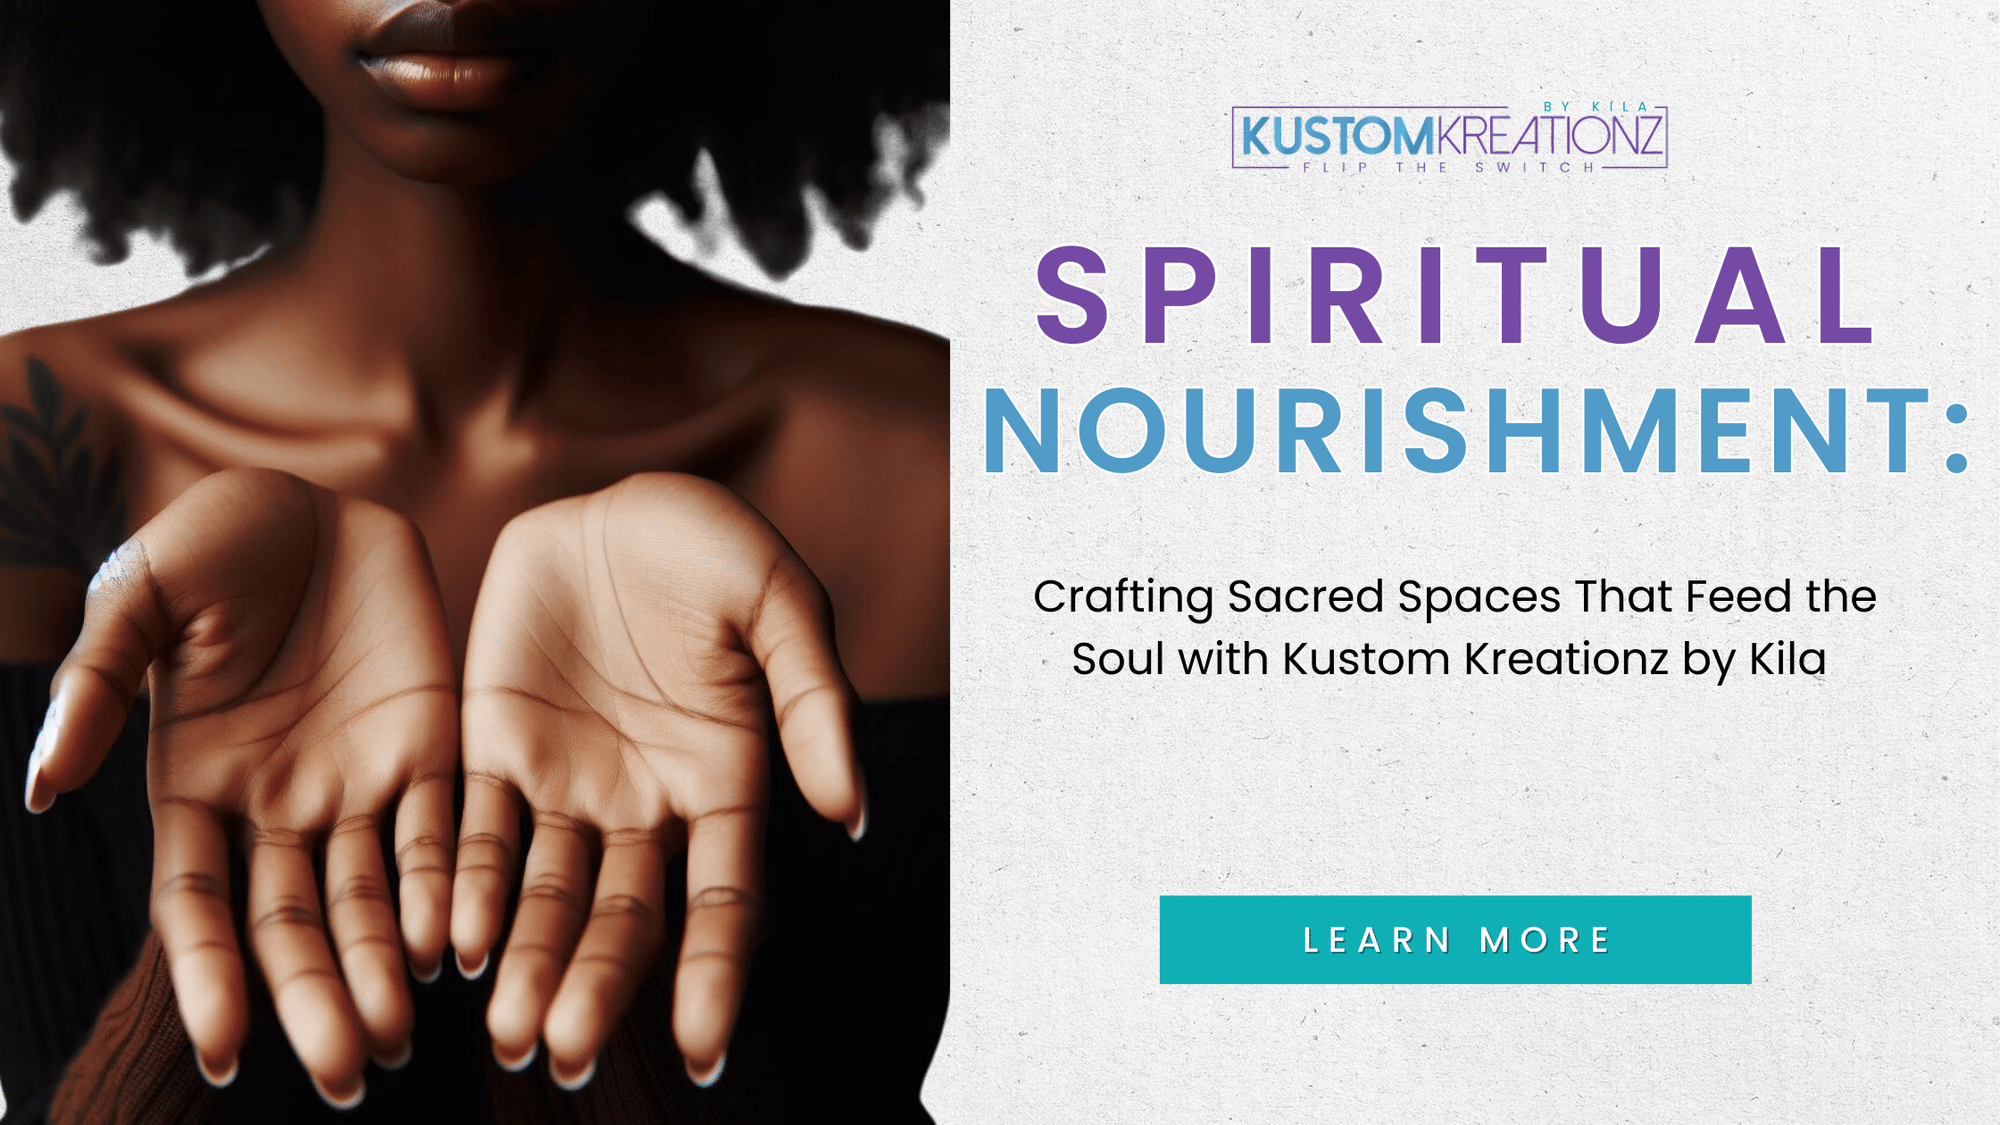 Spiritual Nourishment: Crafting Sacred Spaces That Feed the Soul with Kustom Kreationz by Kila | Blog Post